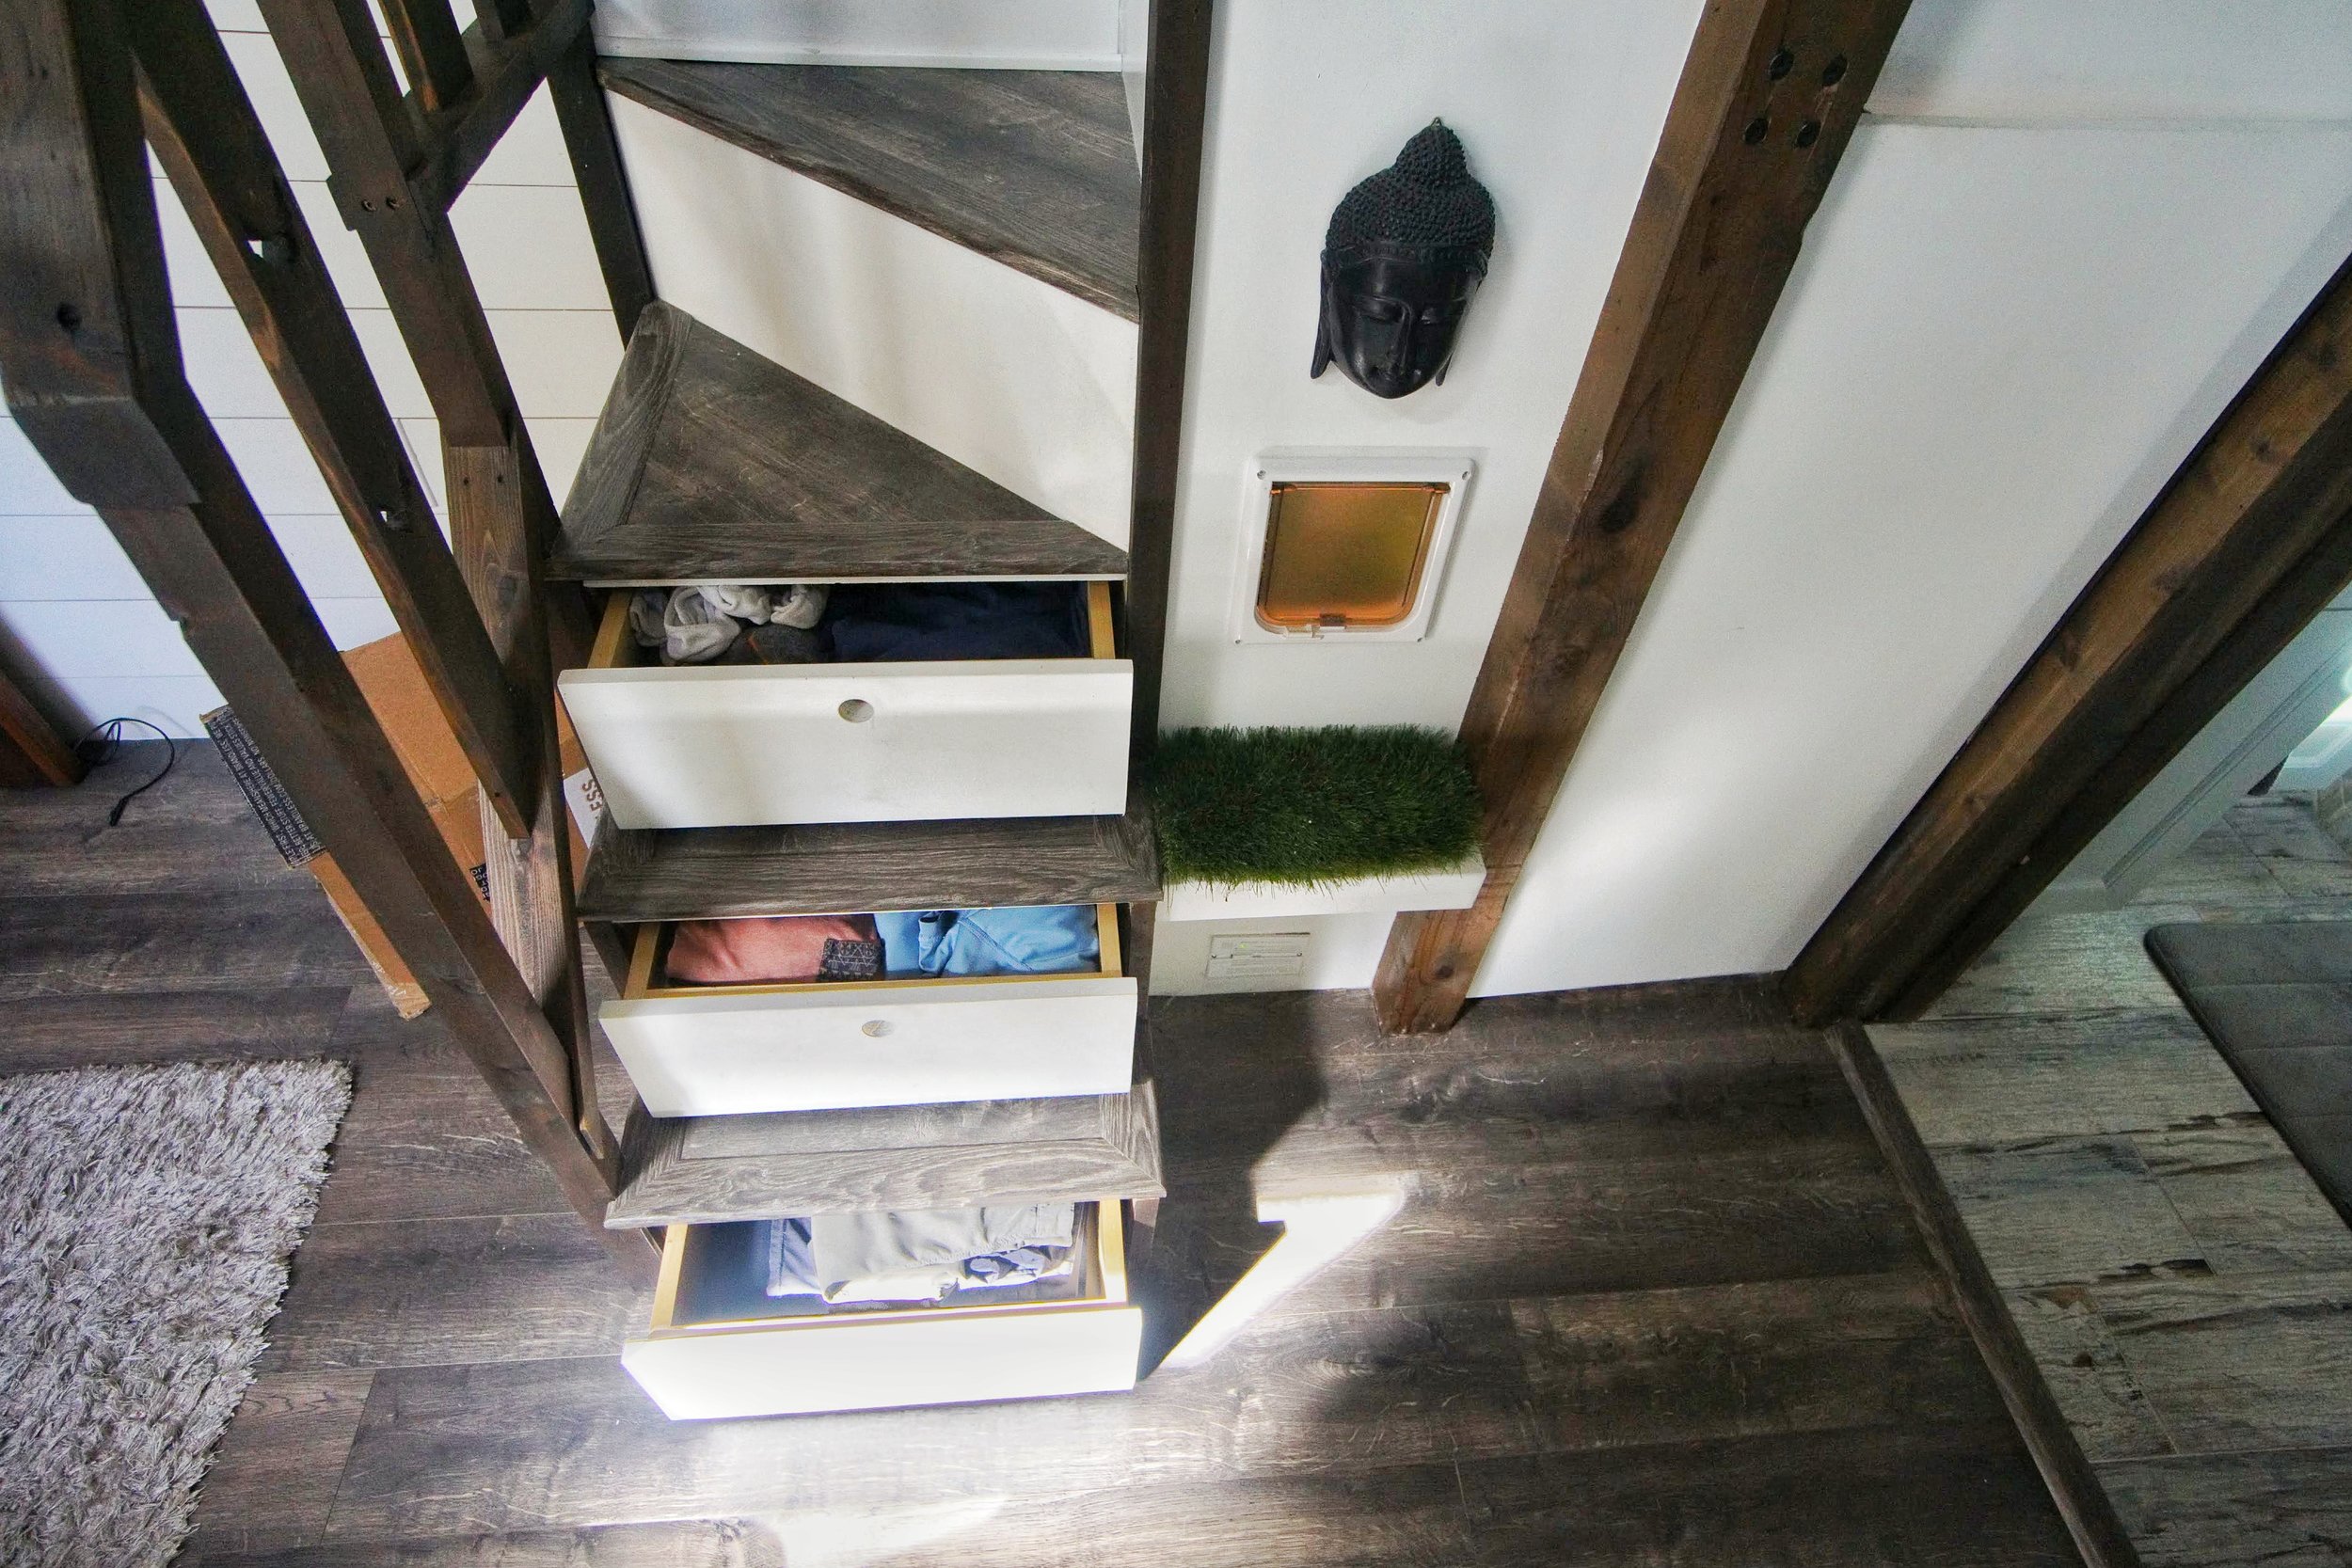 5 Tiny-House Storage Ideas to Steal from the Experts